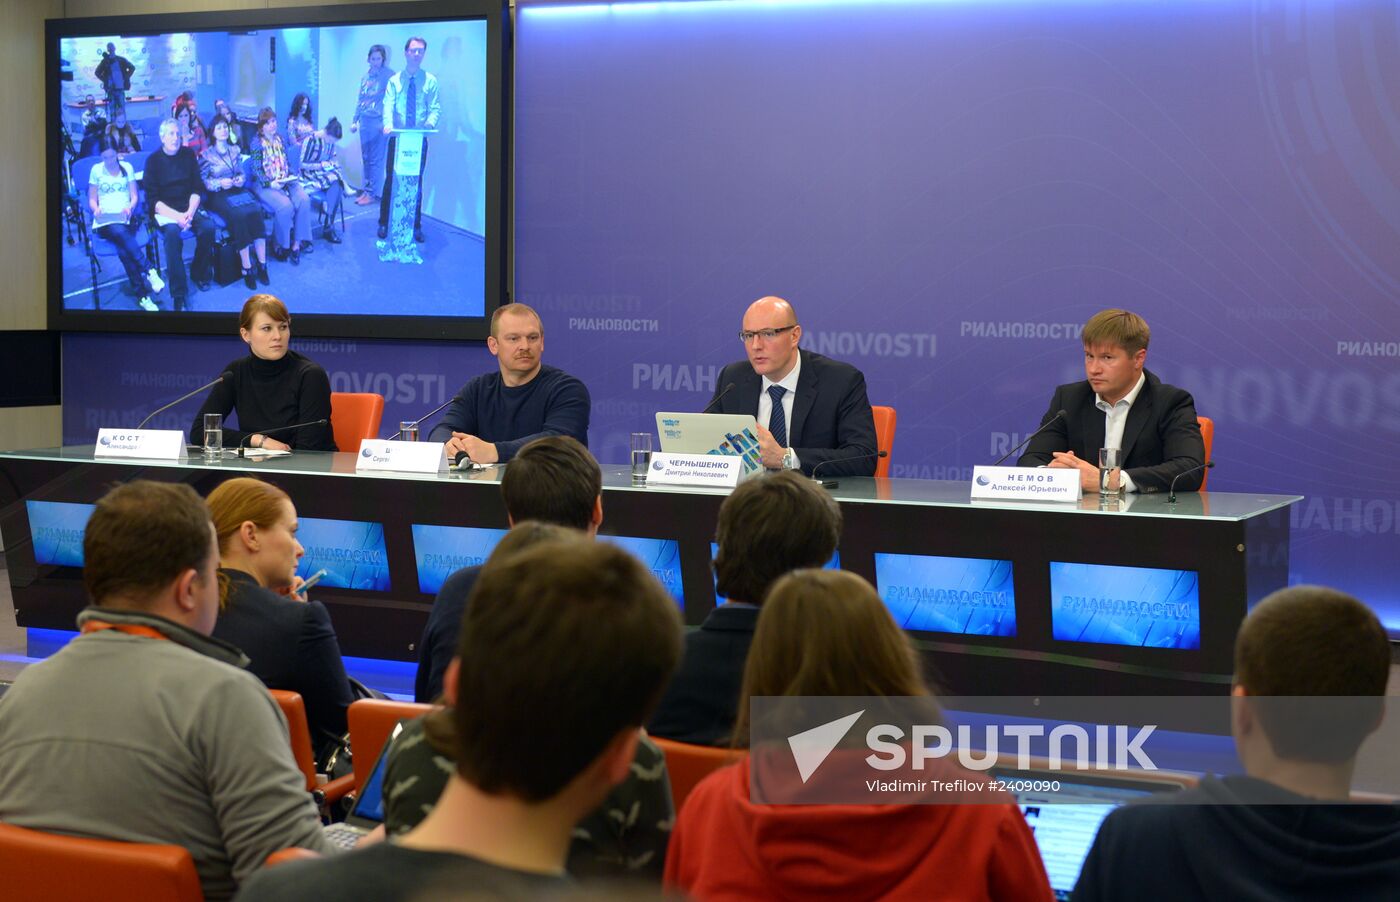 Concluding news conference by Sochi 2014 Organizing Committee